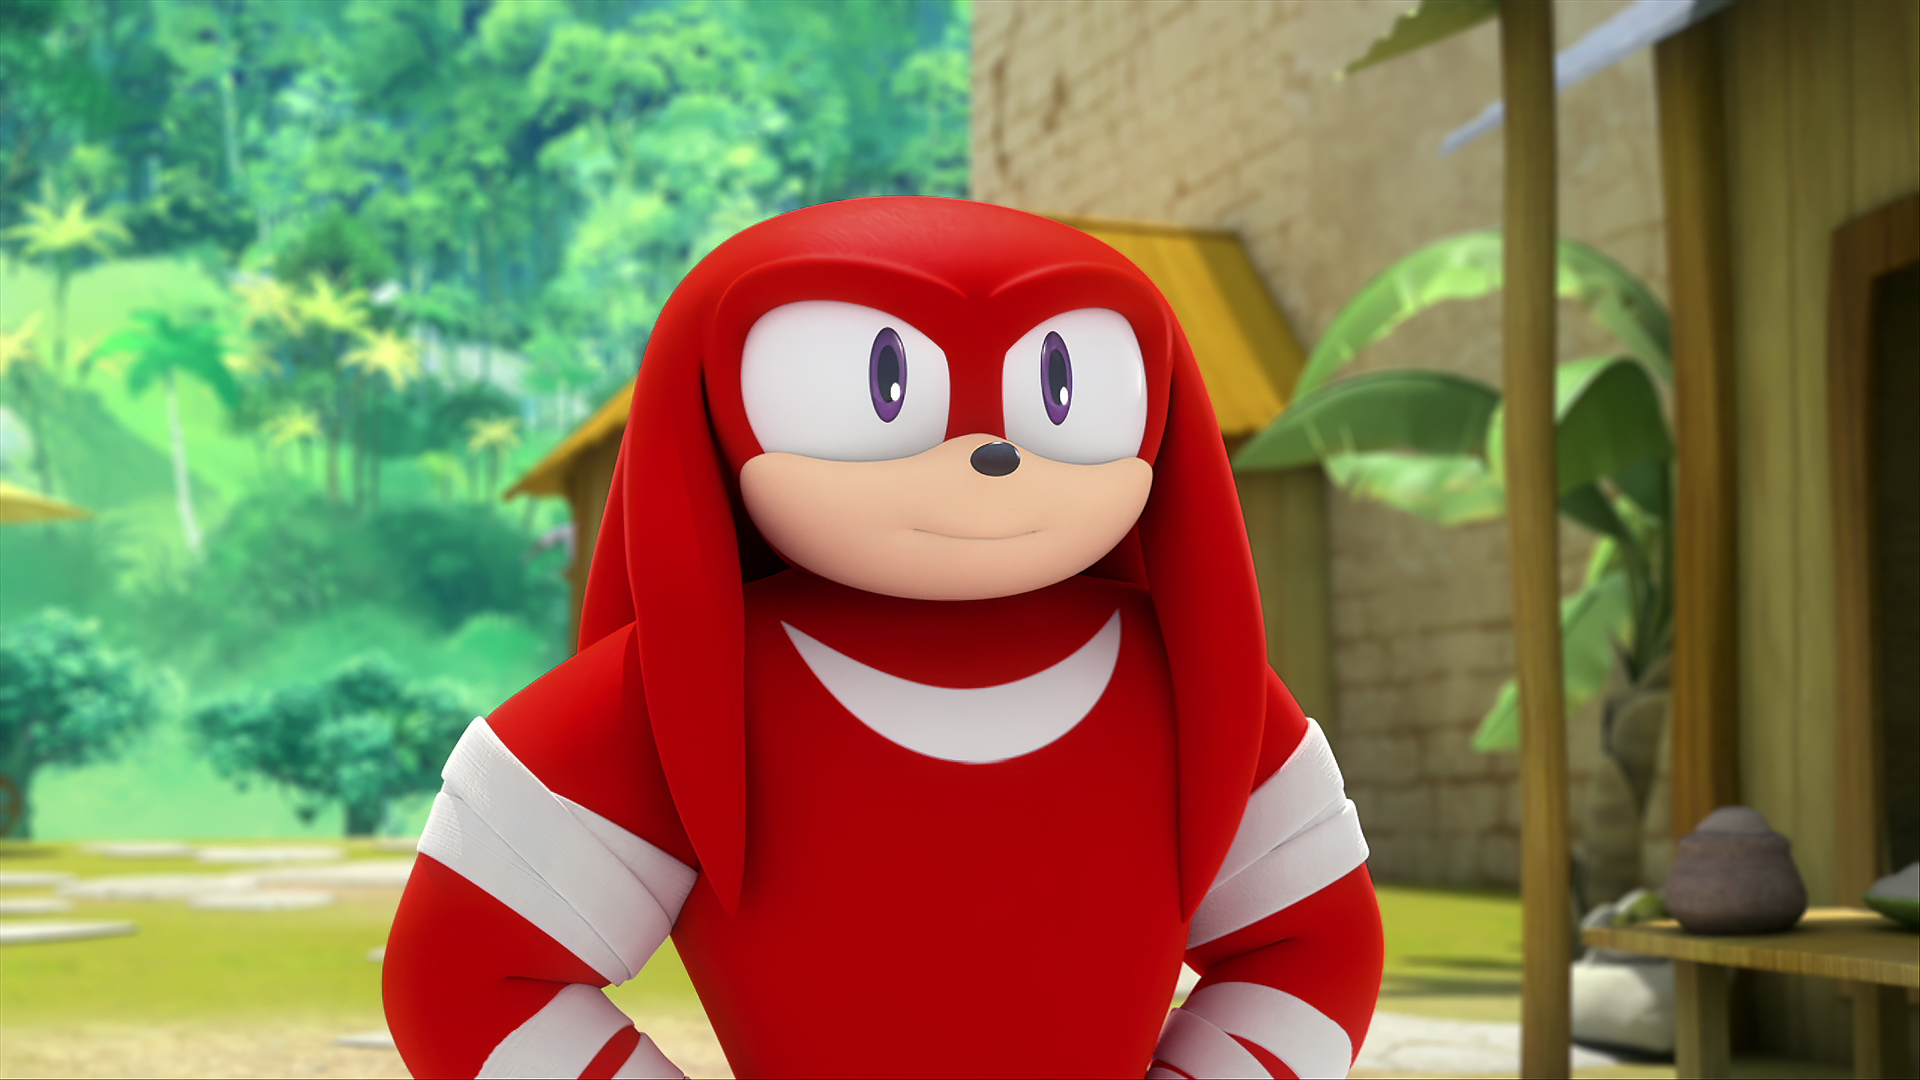 Sonic Prime - Knuckles the Dread #53 by SonicBoomGirl23 on DeviantArt